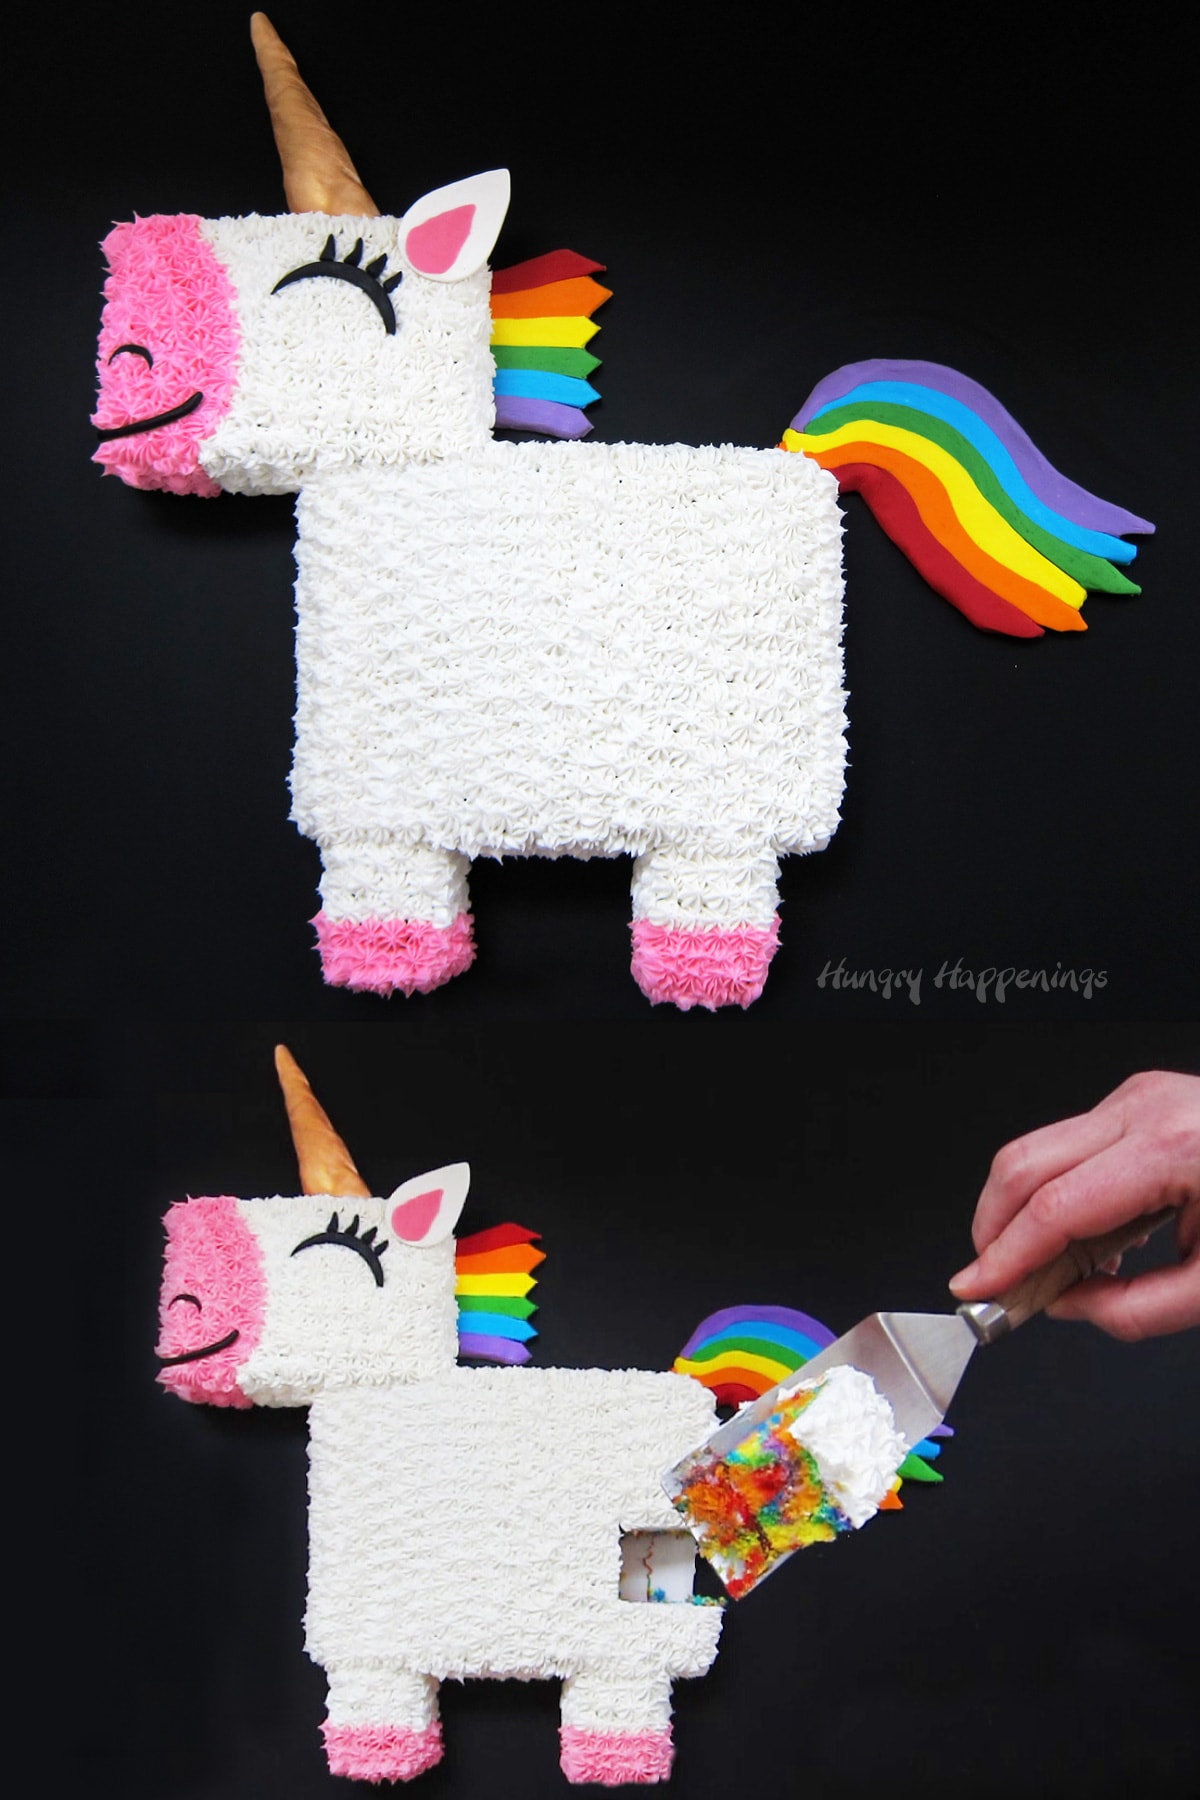 1 whole rainbow unicorn cake and 1 with a cut taken out showing the rainbow cake inside.